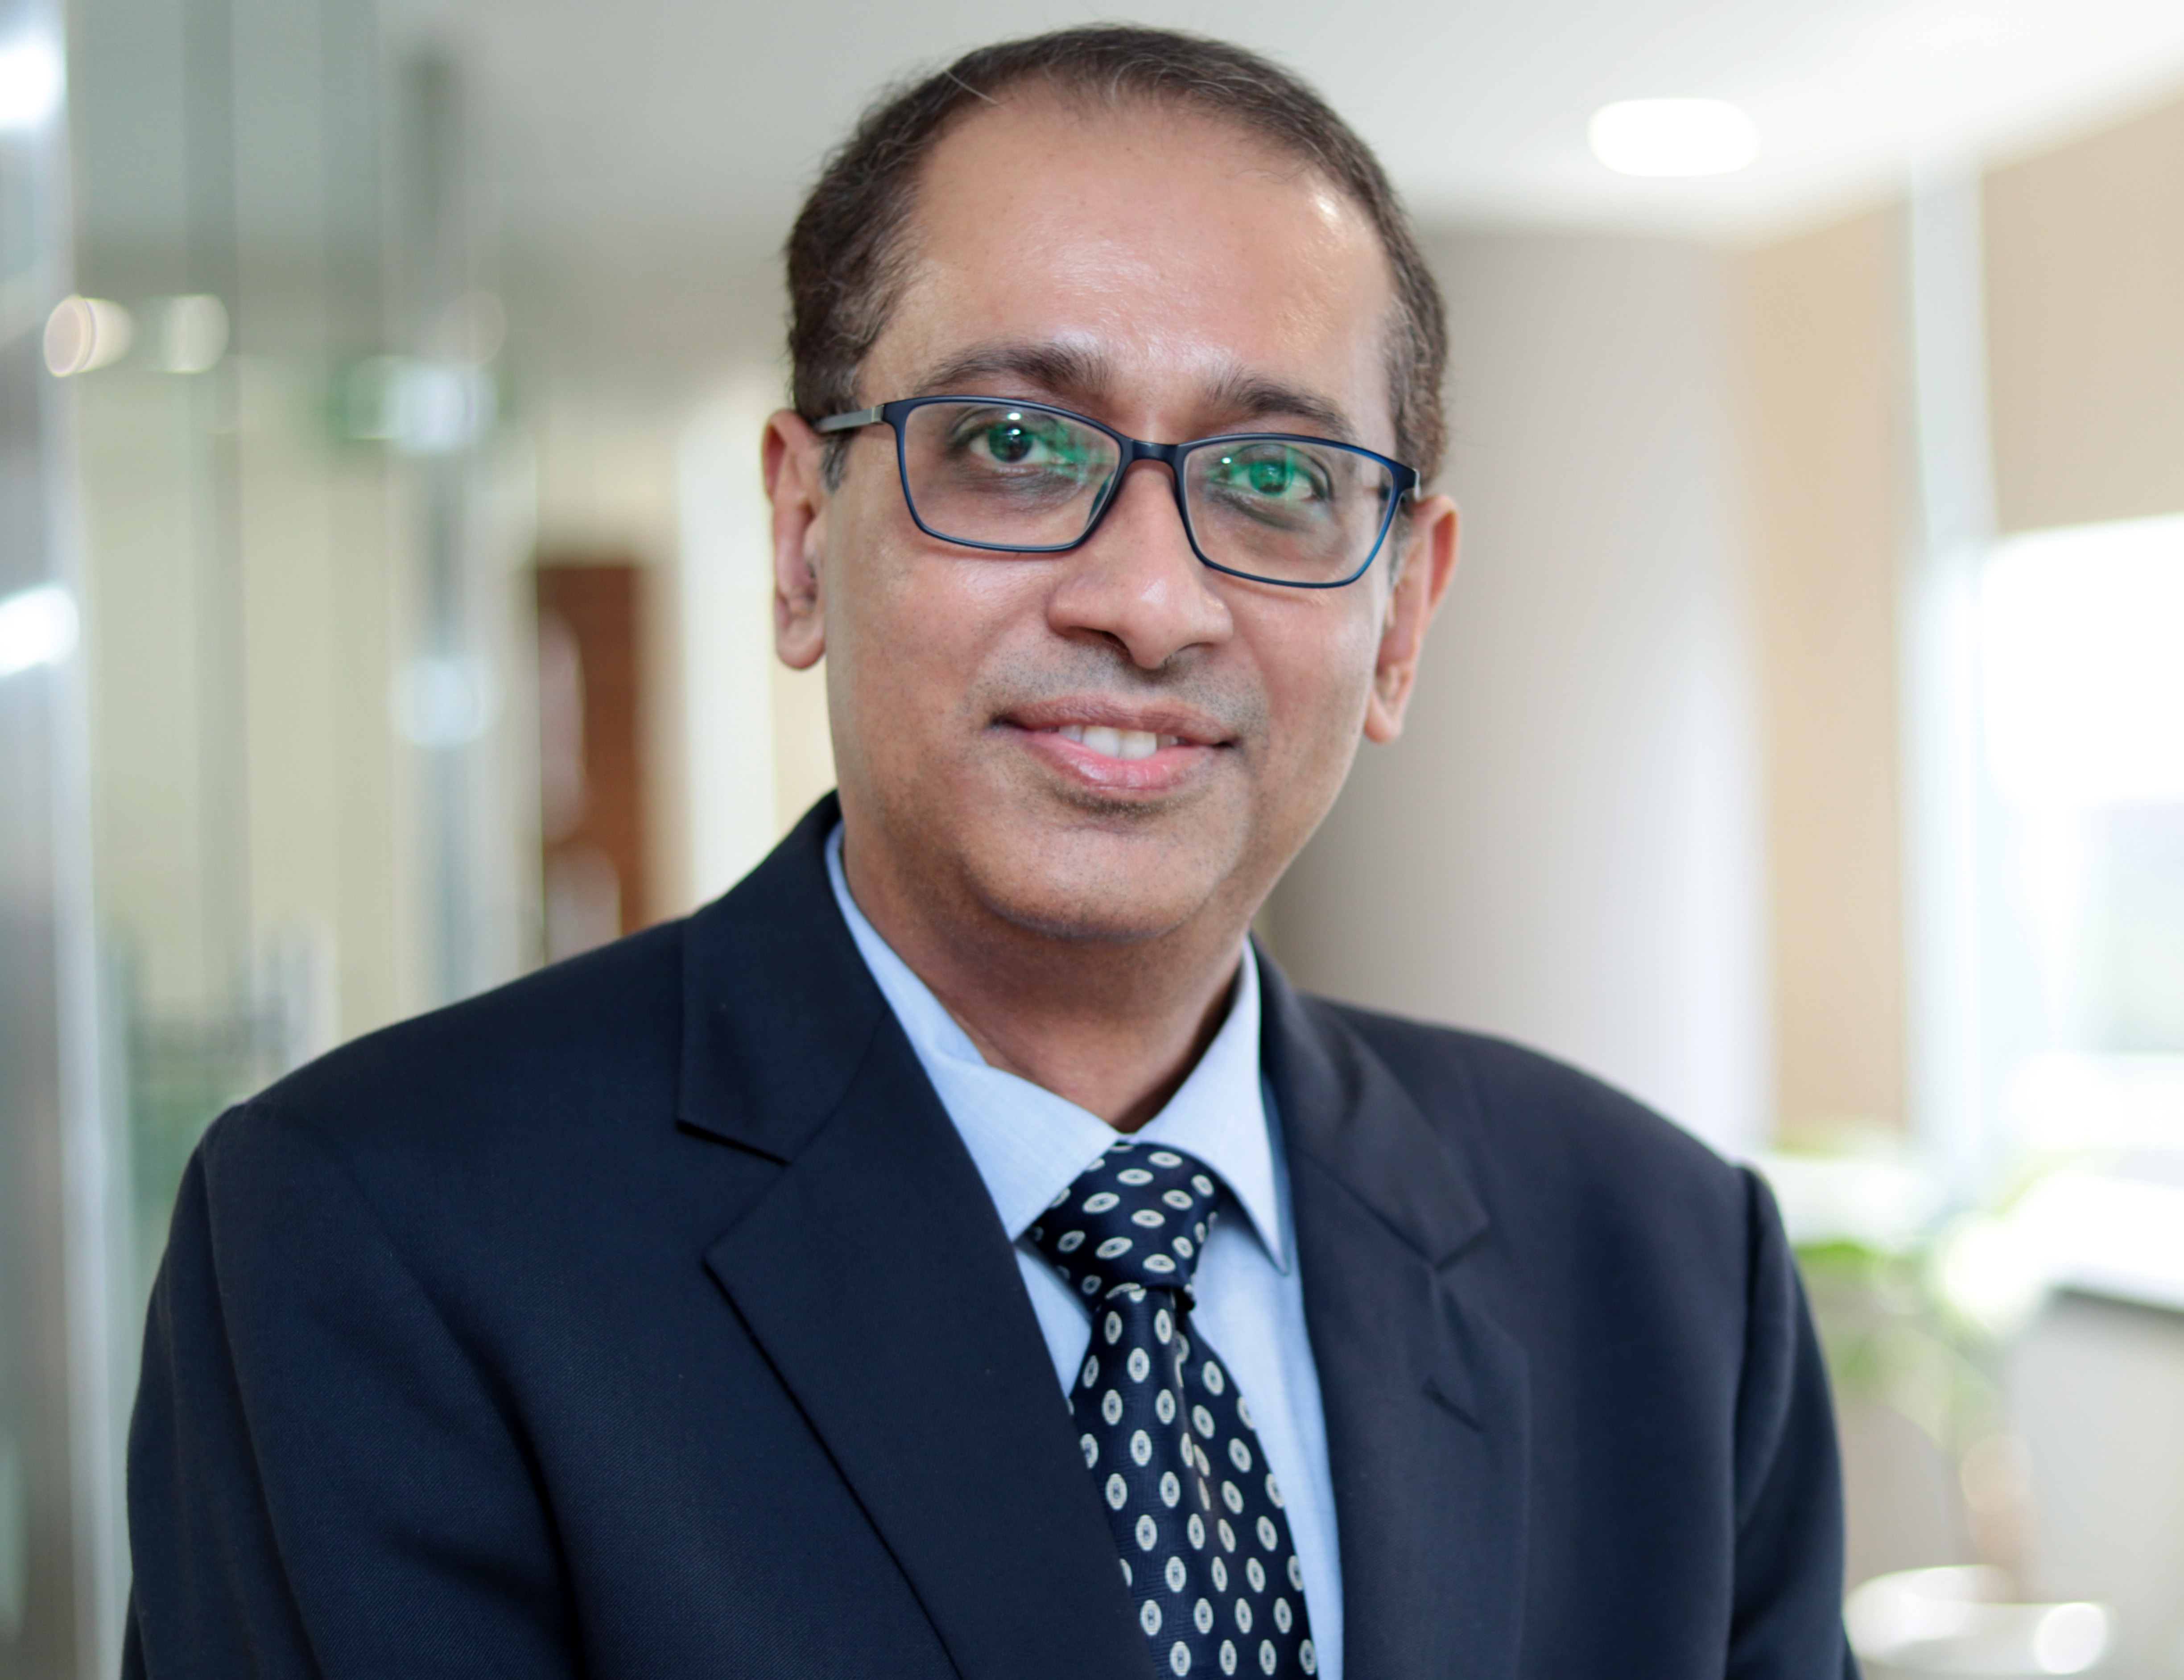 Arindam Guha, <span>Partner & Leader, Government and Public Services, Deloitte India </span>